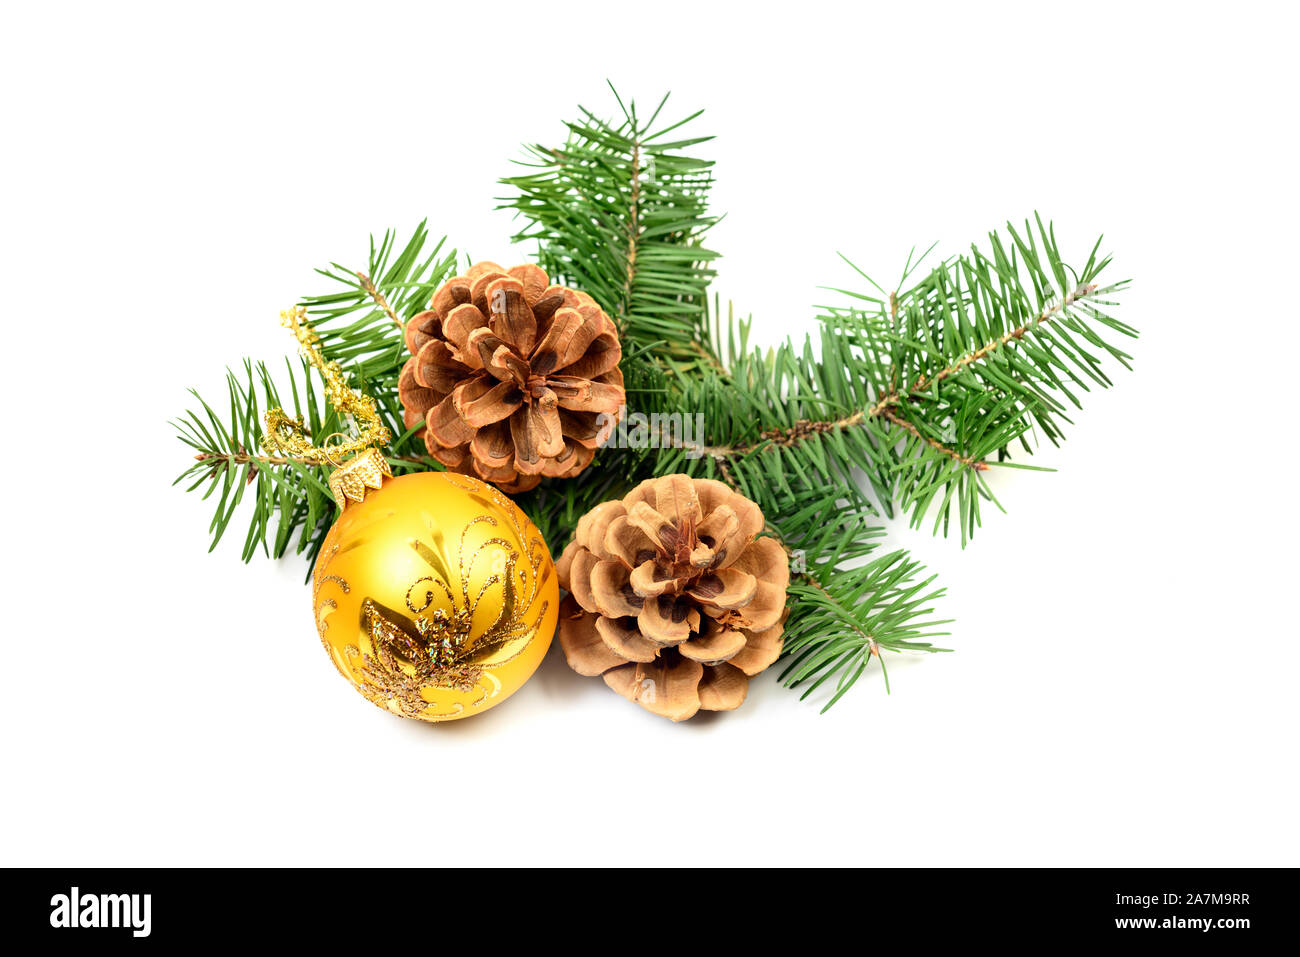 Pine cones with spruce tree branch and Christmas decoration ball on a white background Stock Photo